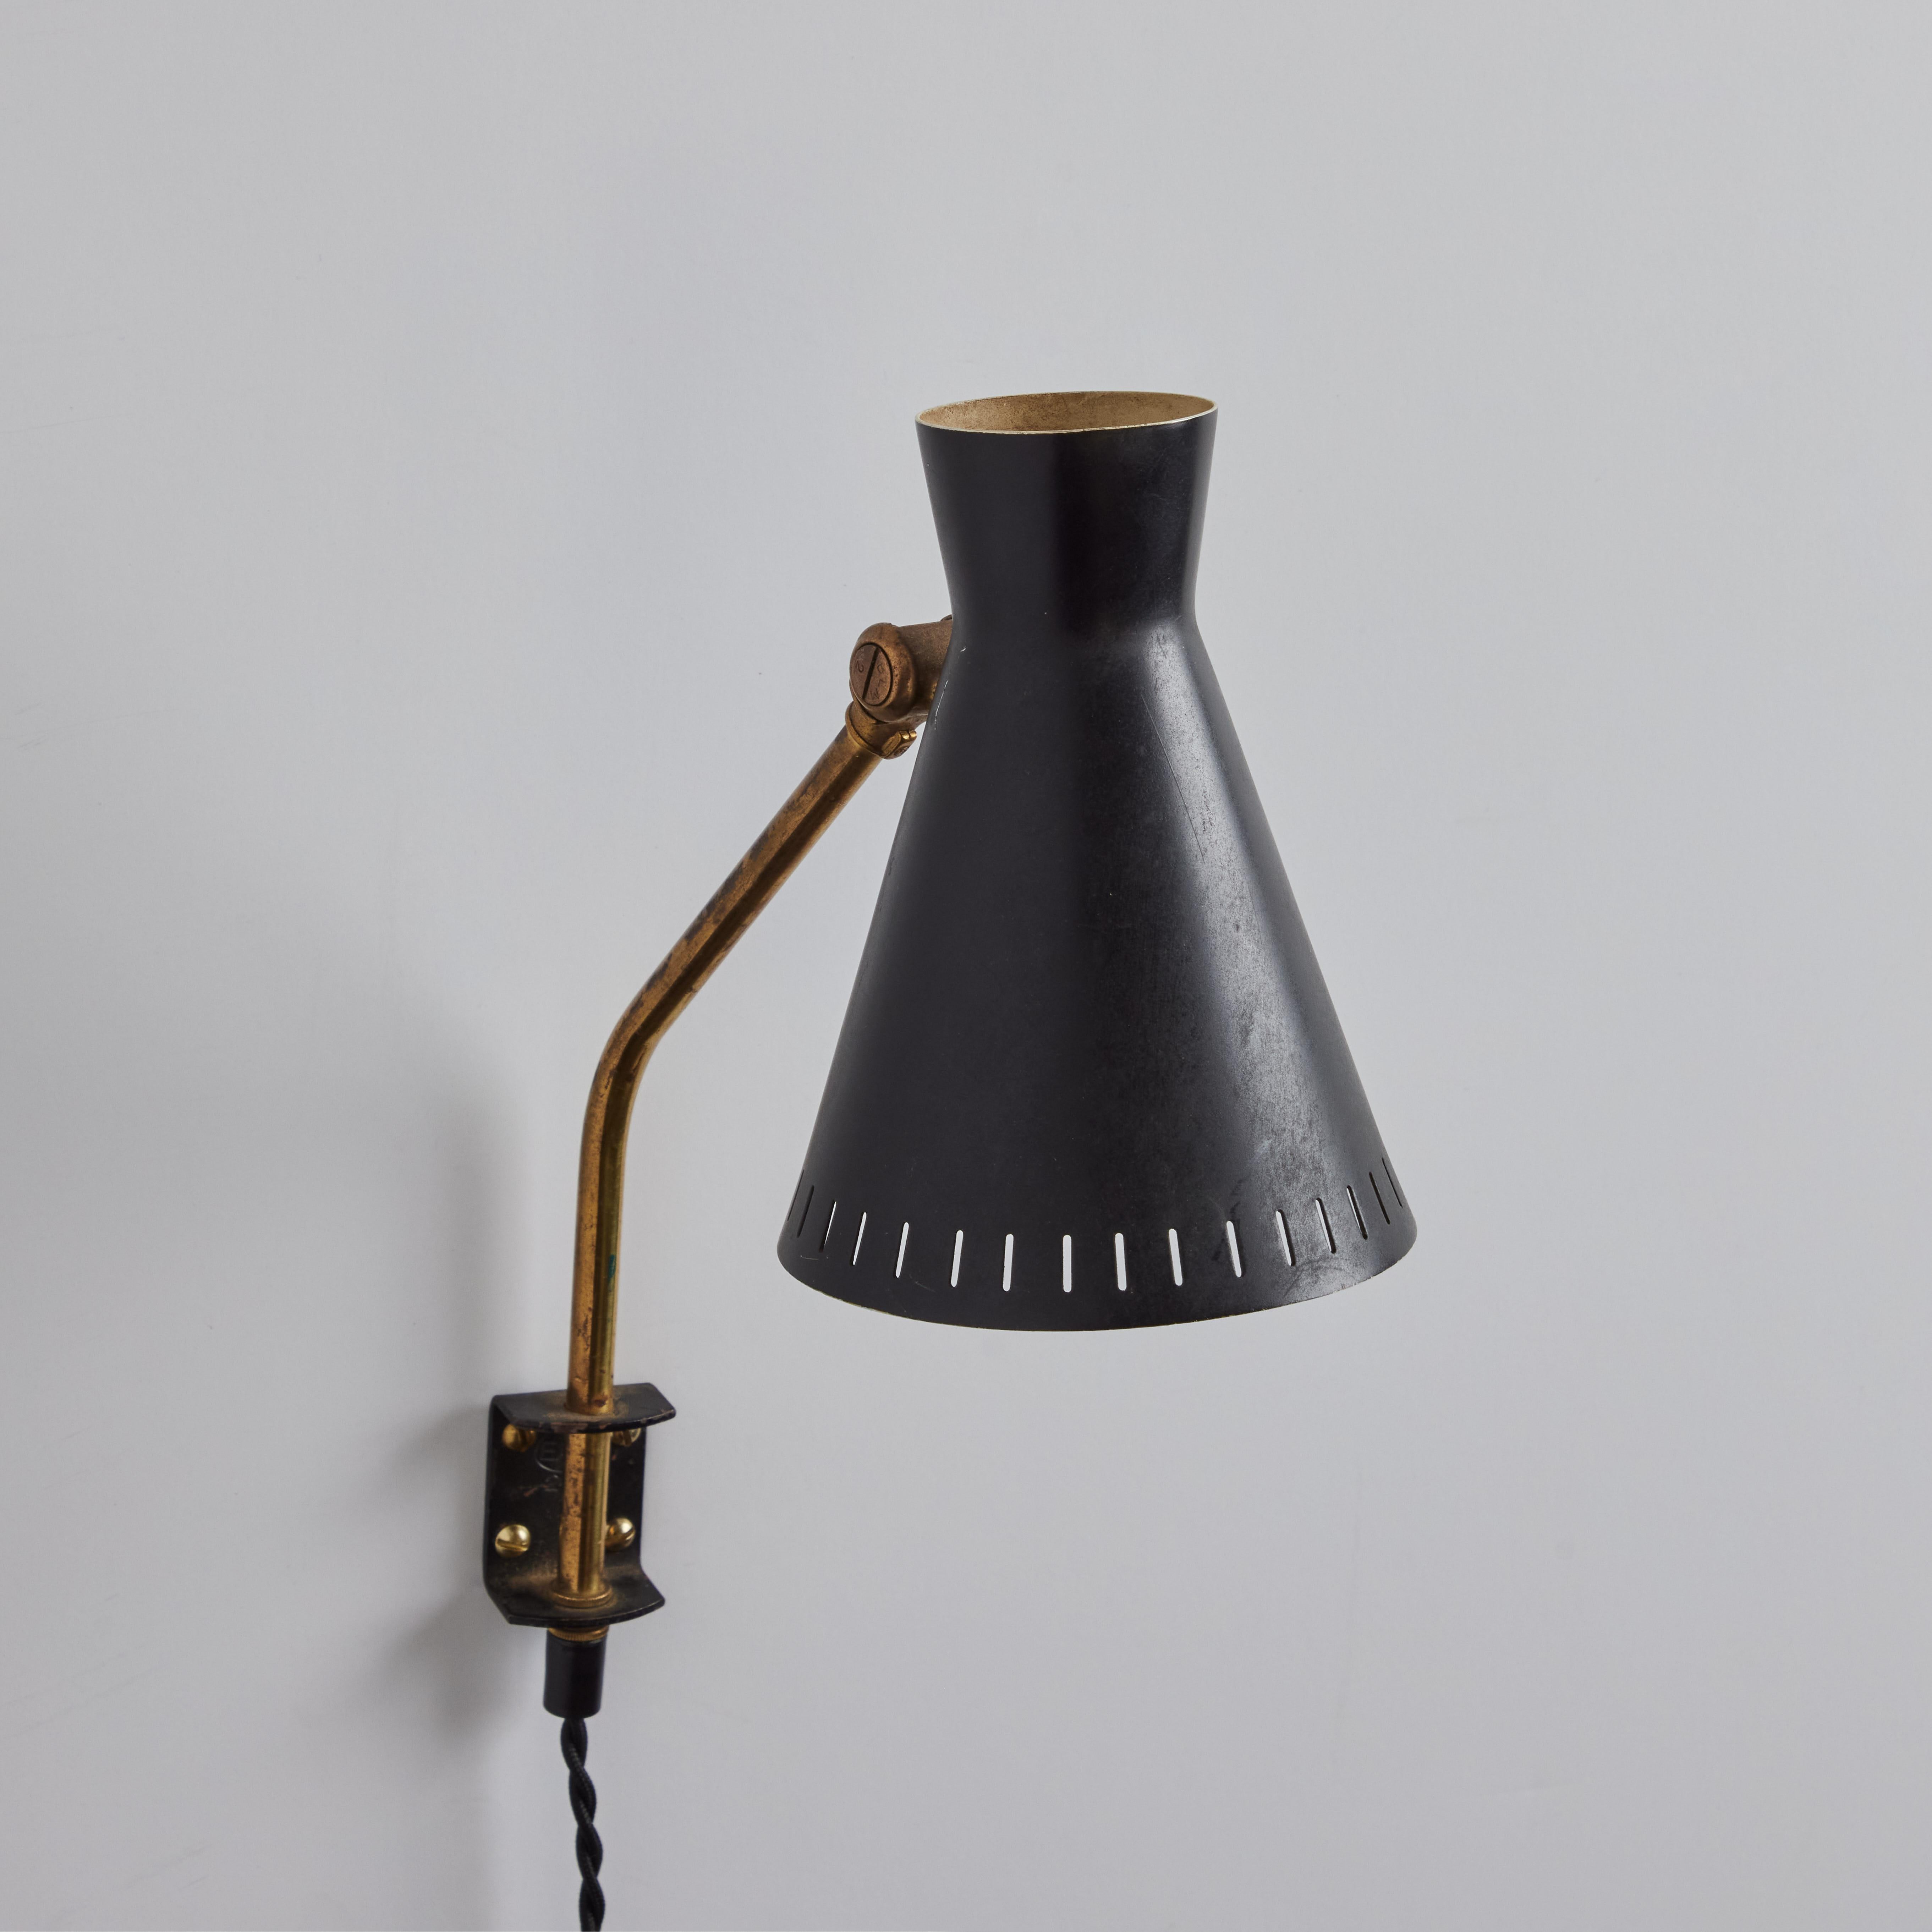 1950s Perforated Metal Diabolo Plug-In Wall Lamp Attributed to Mauri Almari For Sale 6